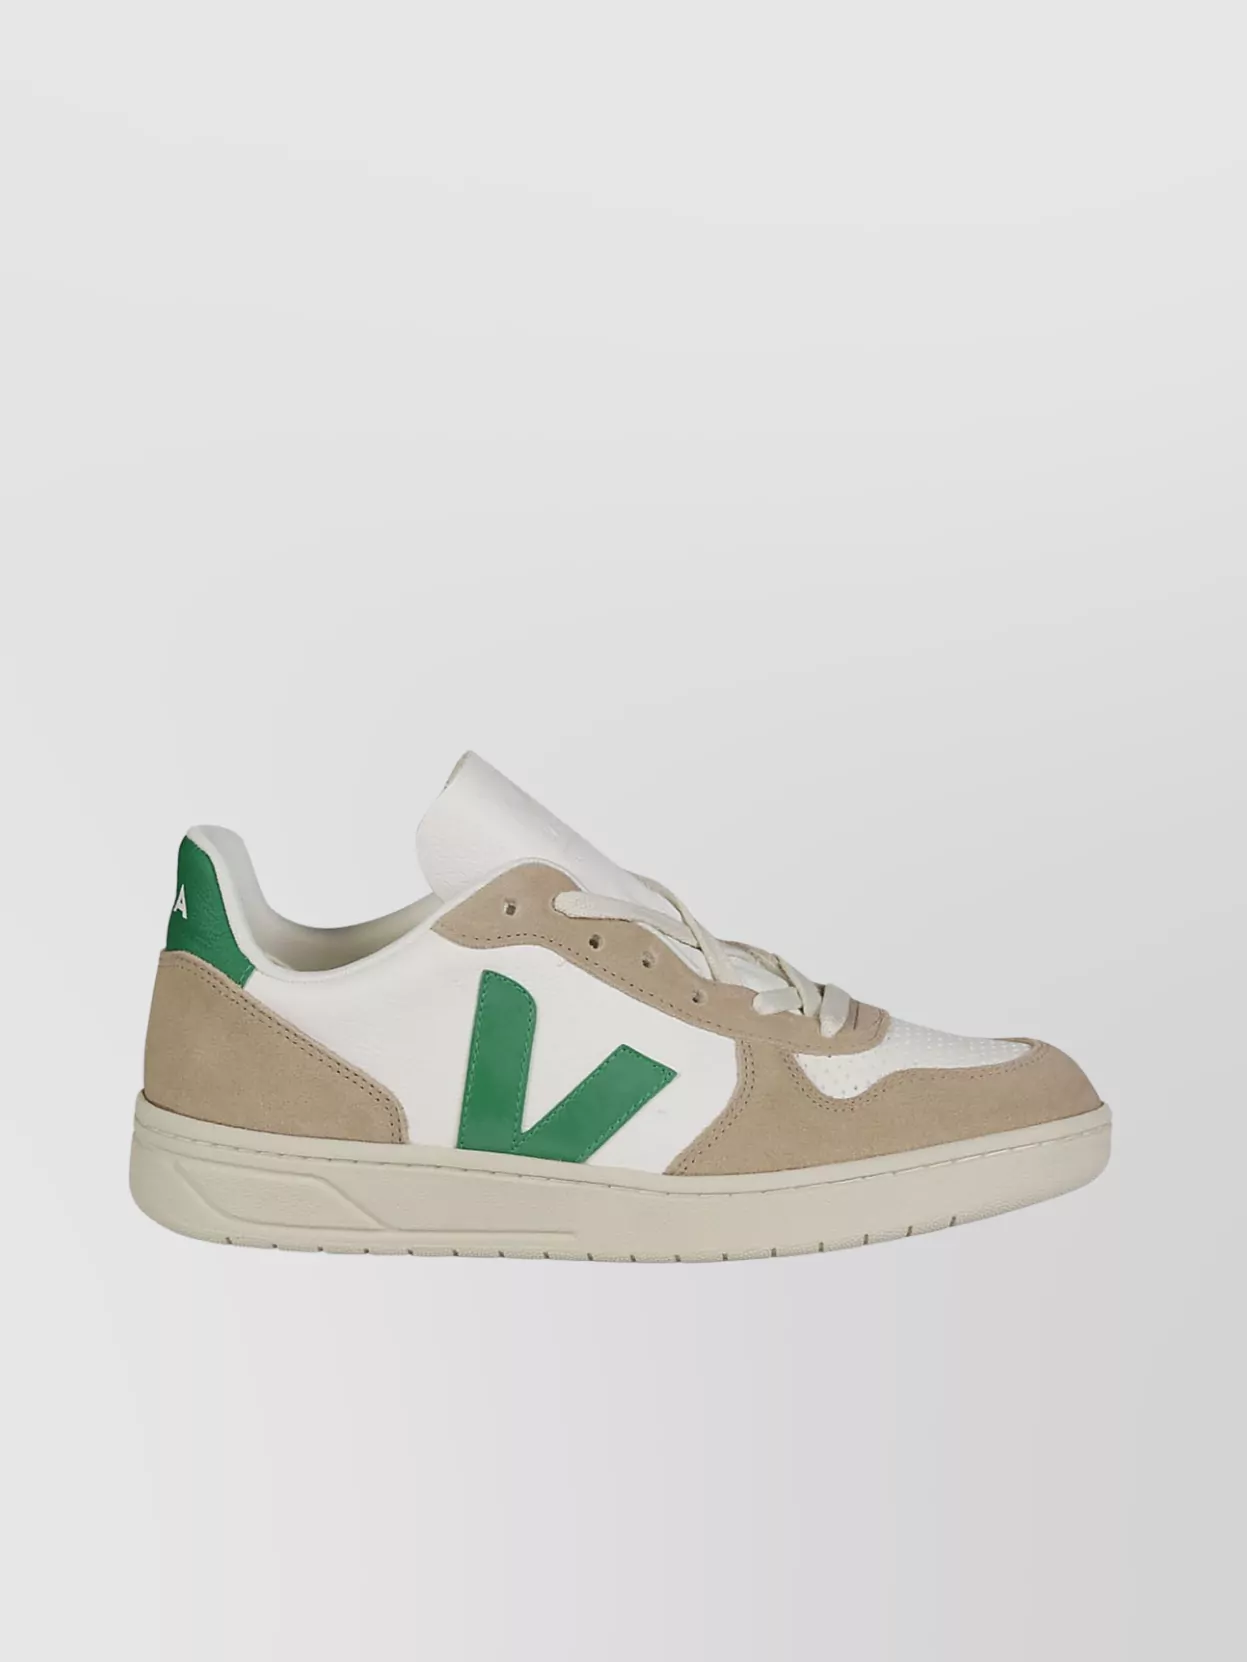 Shop Veja Leather Sneakers With Perforated Toe Box